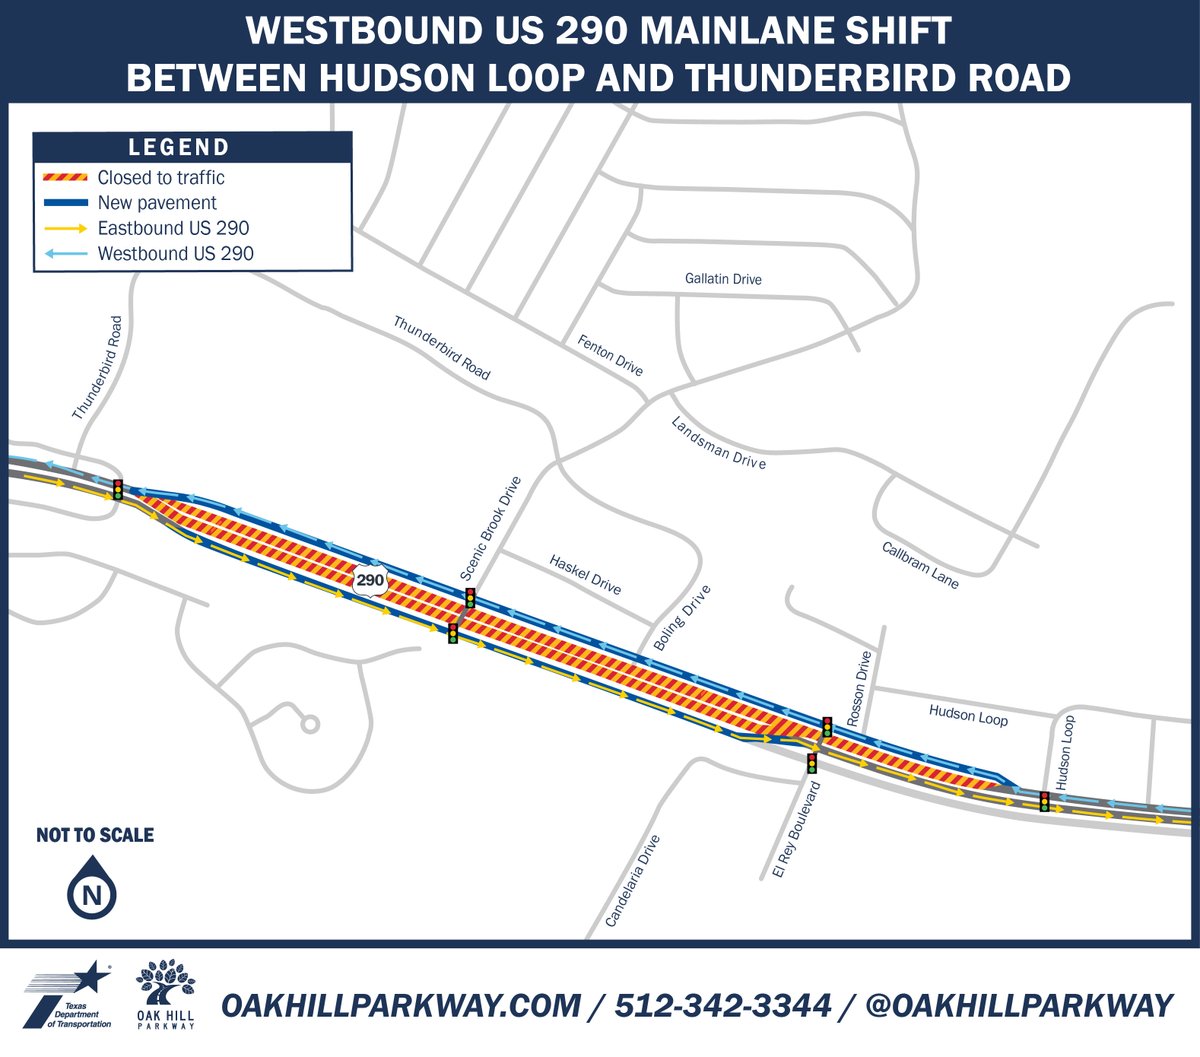 HEADS UP: Tomorrow night, westbound US 290 traffic from Hudson Loop to Thunderbird Road shifts to new westbound US 290 frontage road. #atxtraffic